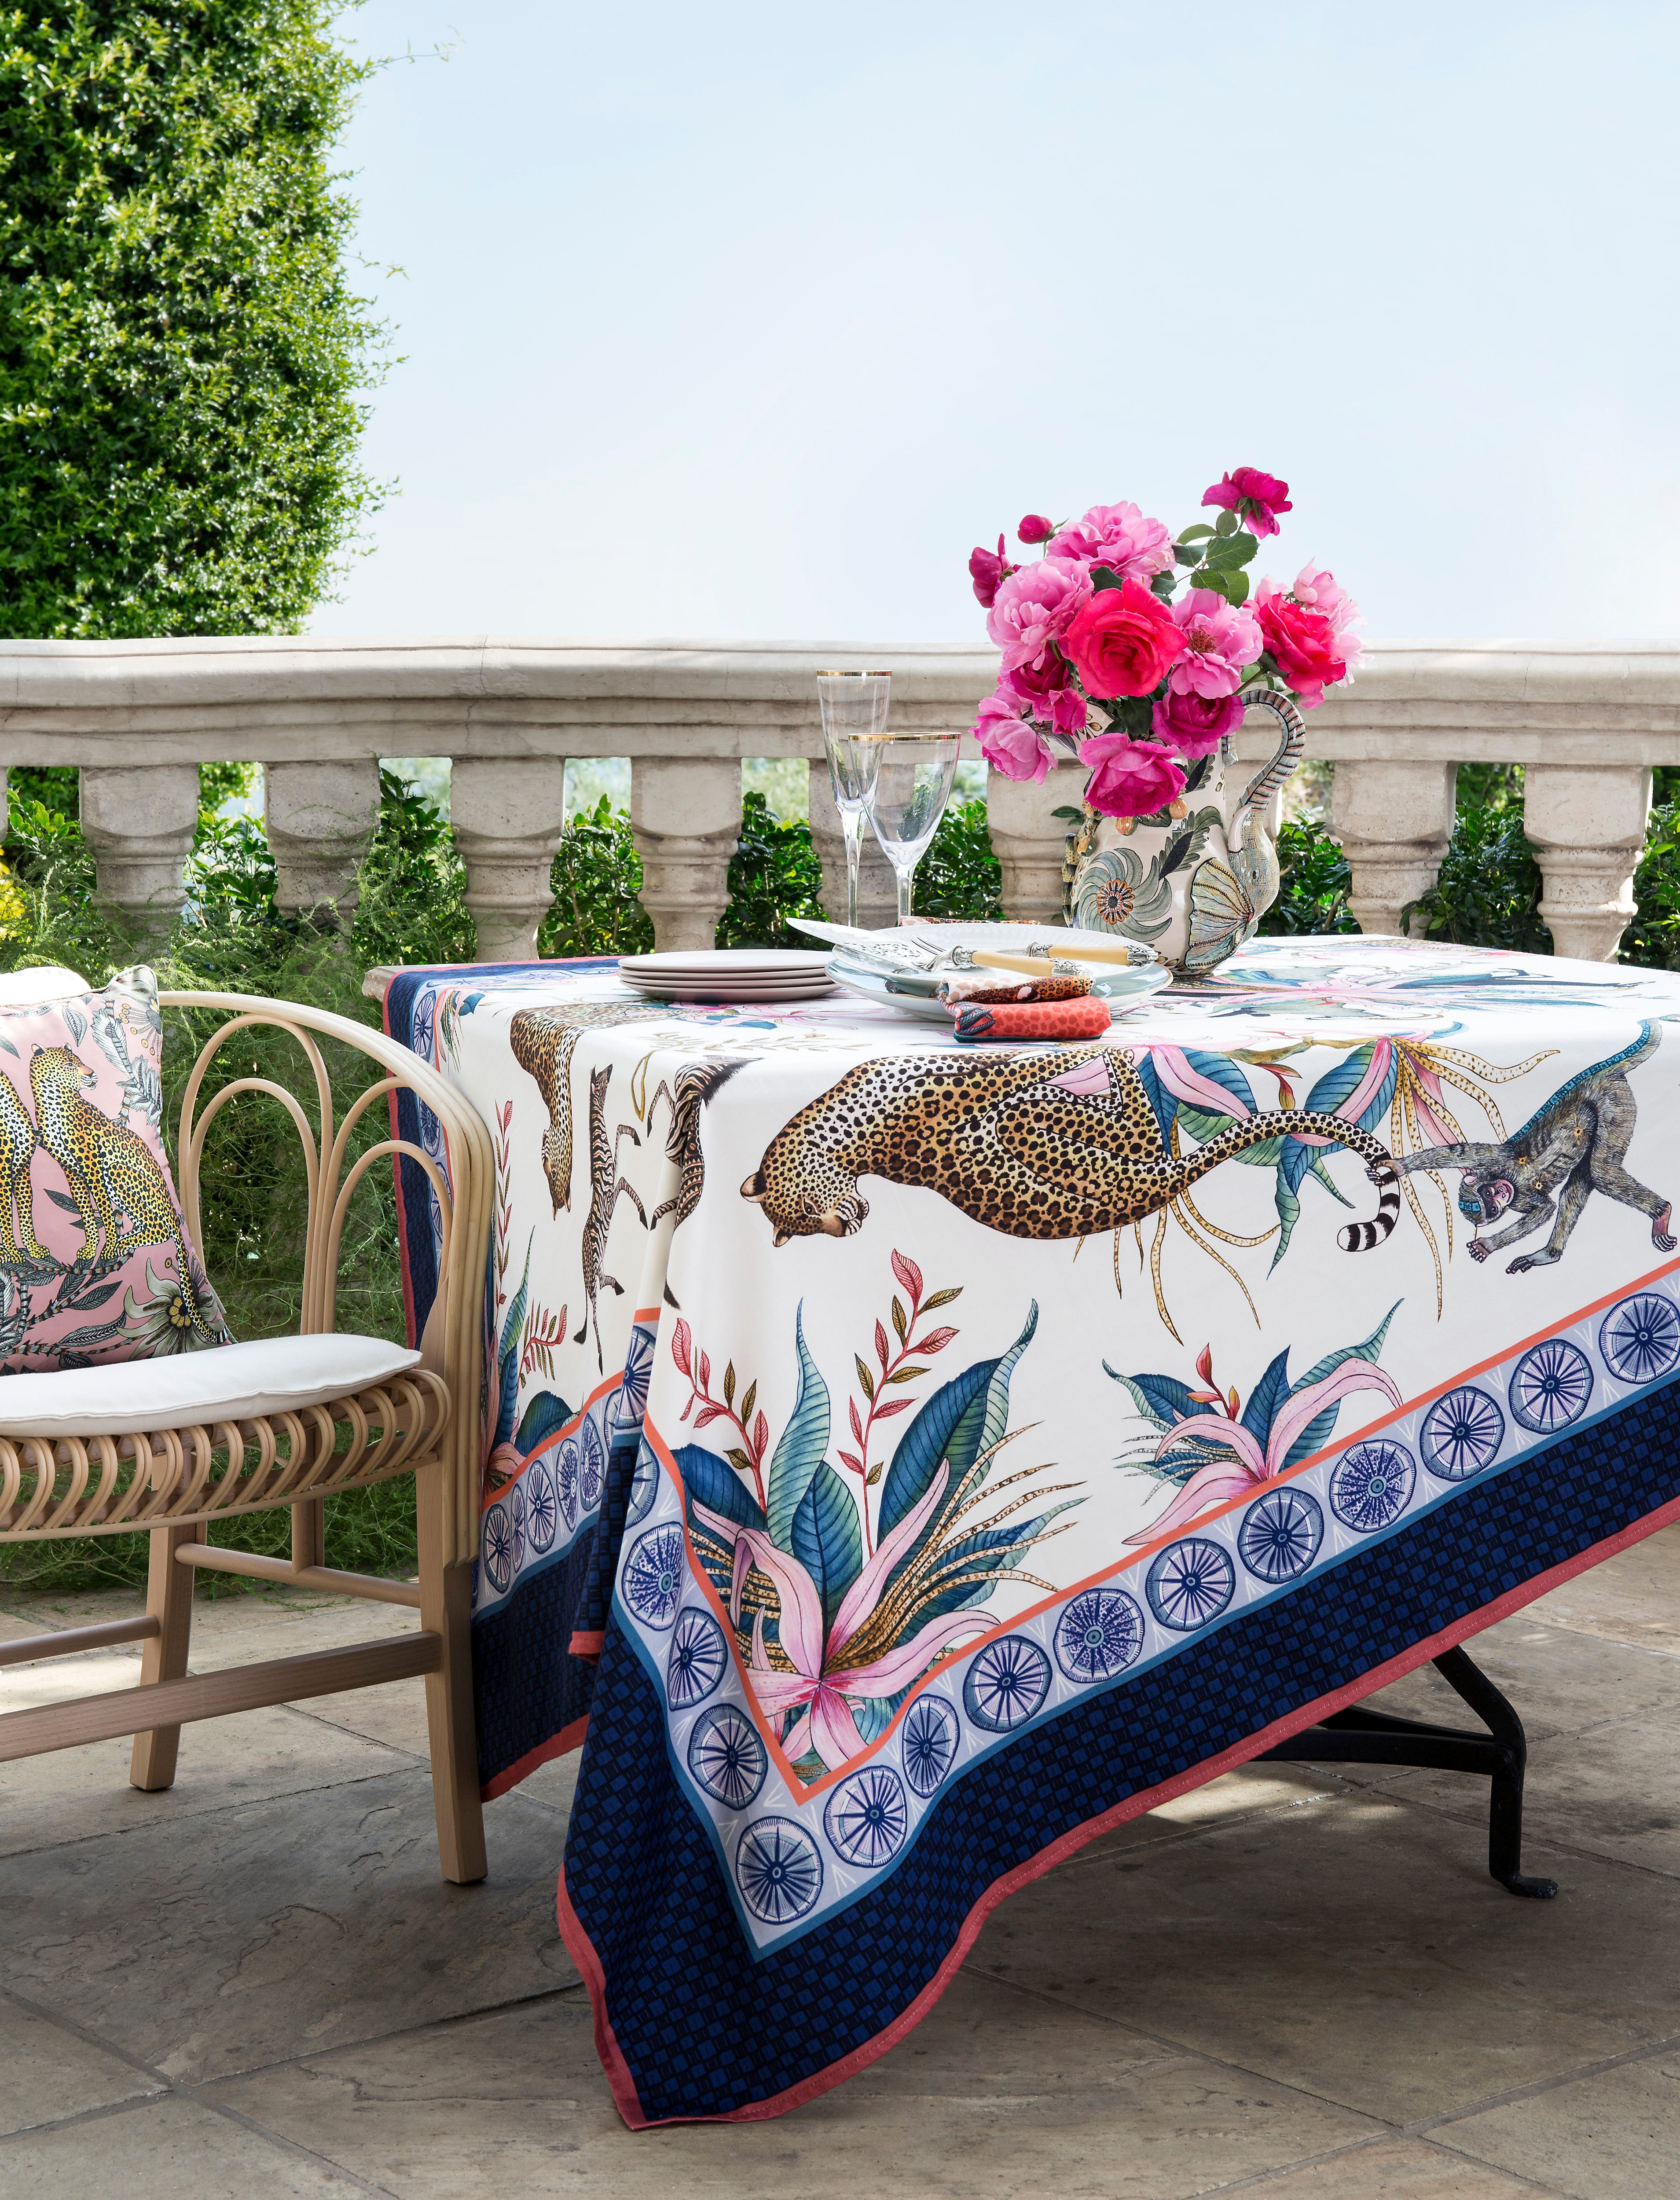 DECORATIVE TABLE CLOTHS & RUNNERS